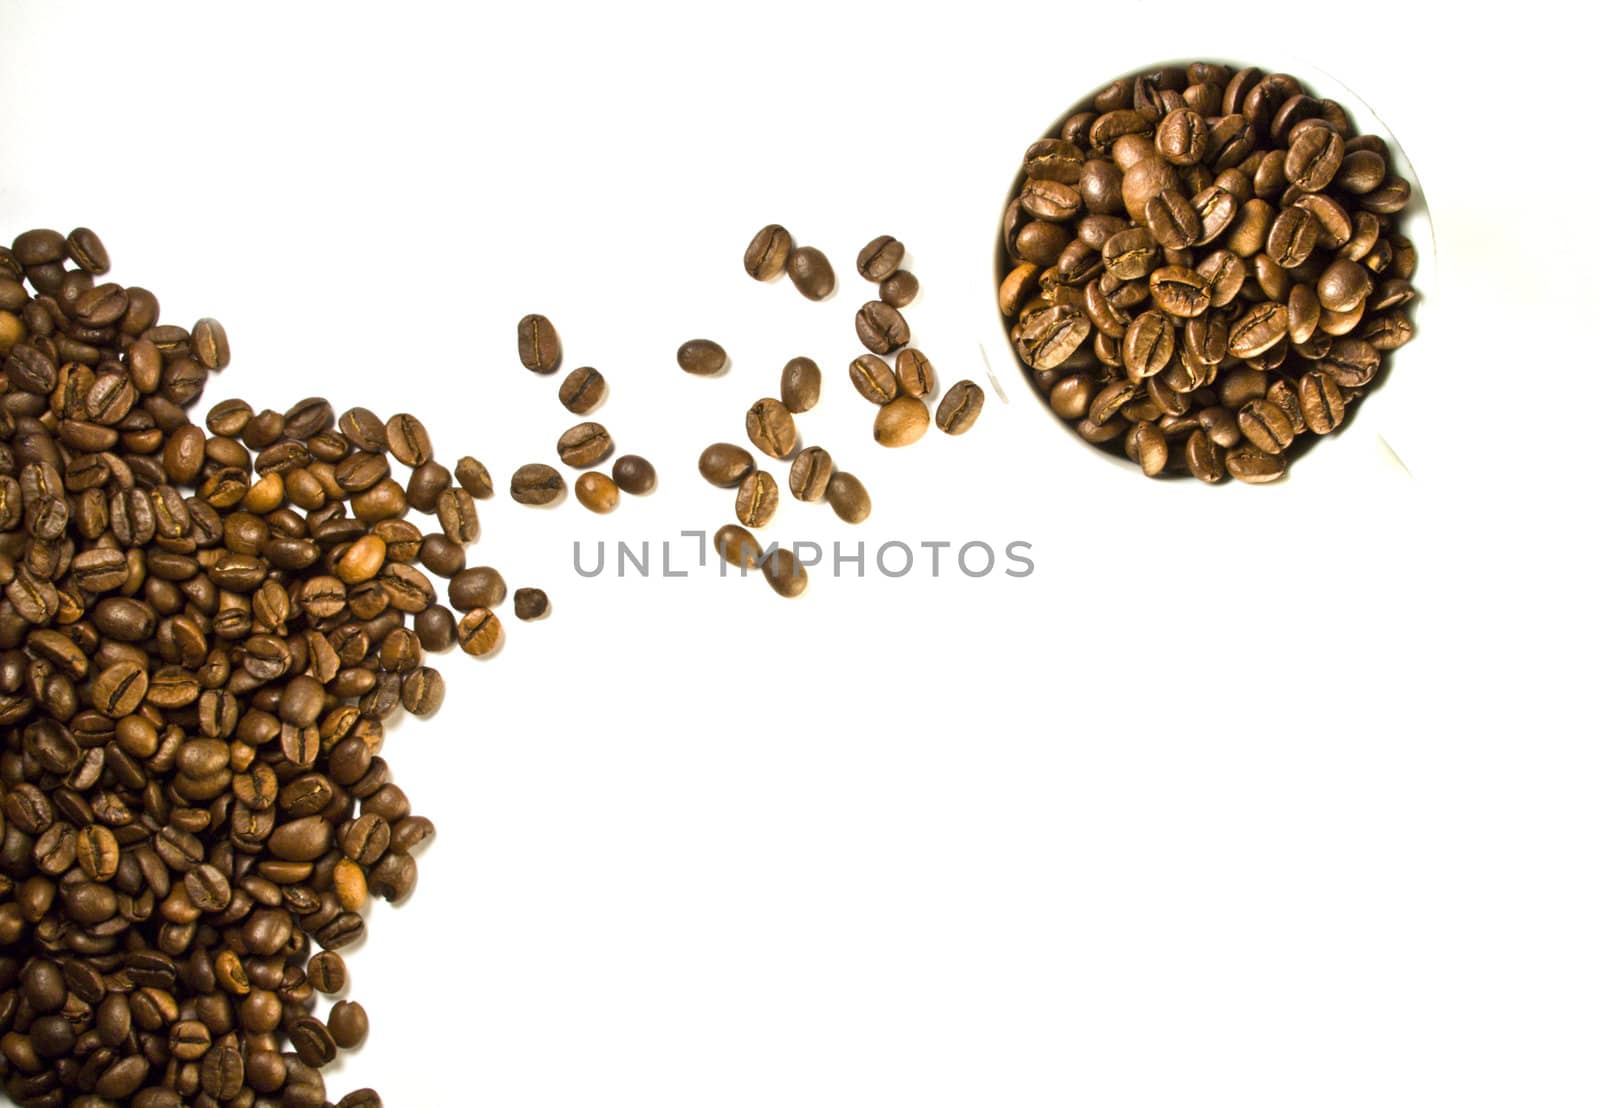 The cup of coffee and beans, isolated on white background.